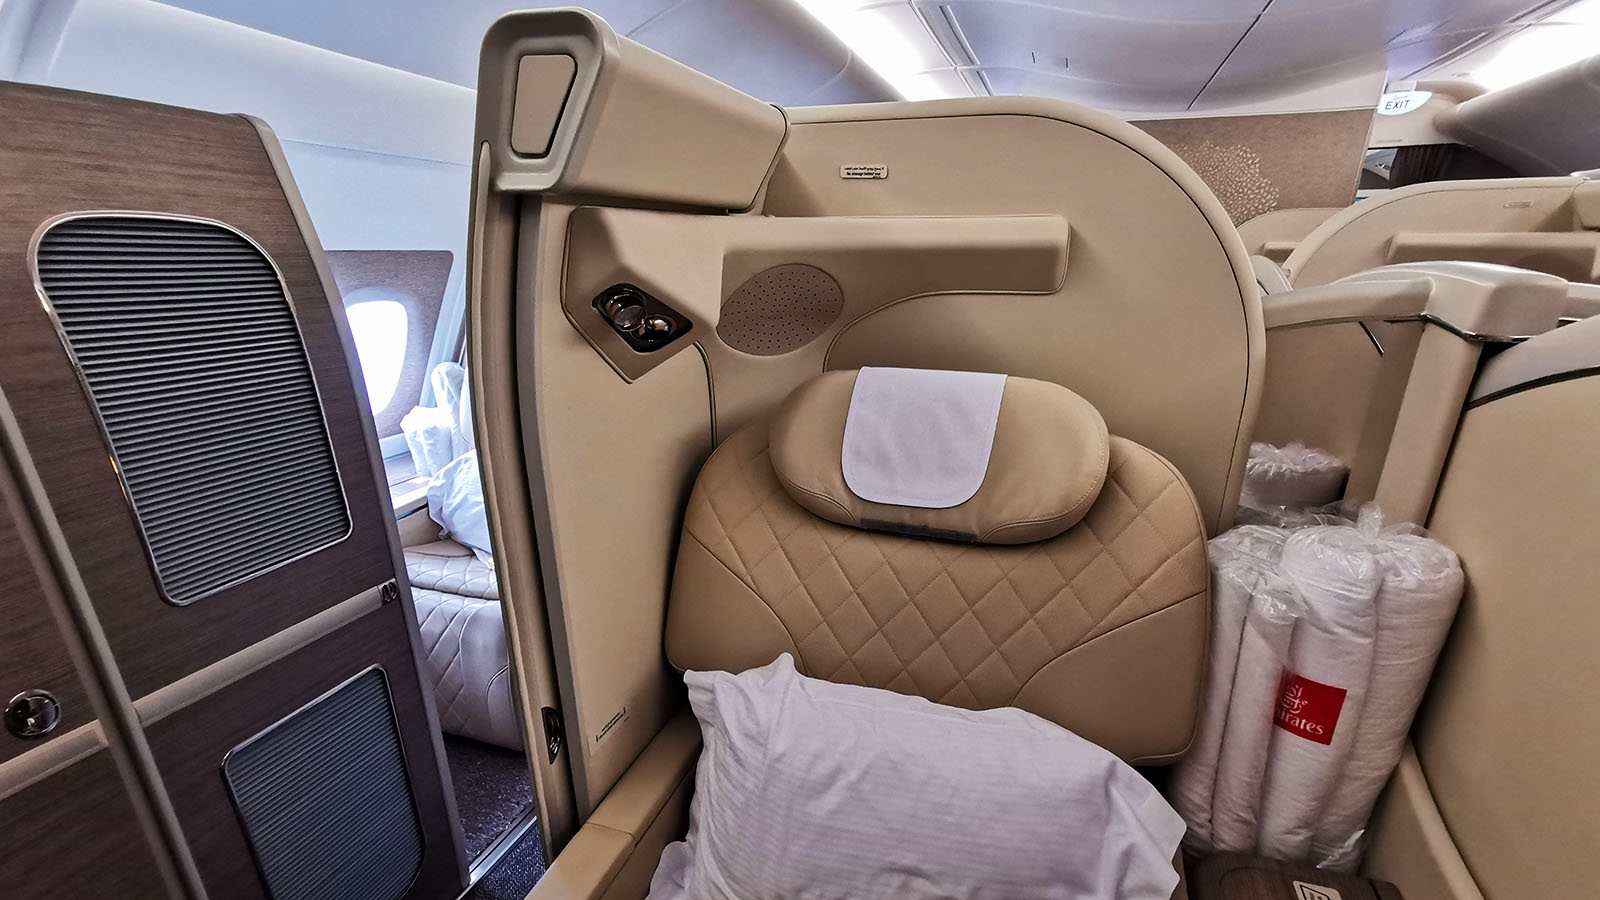 First Class seat on Emirates' Airbus A380 from Melbourne